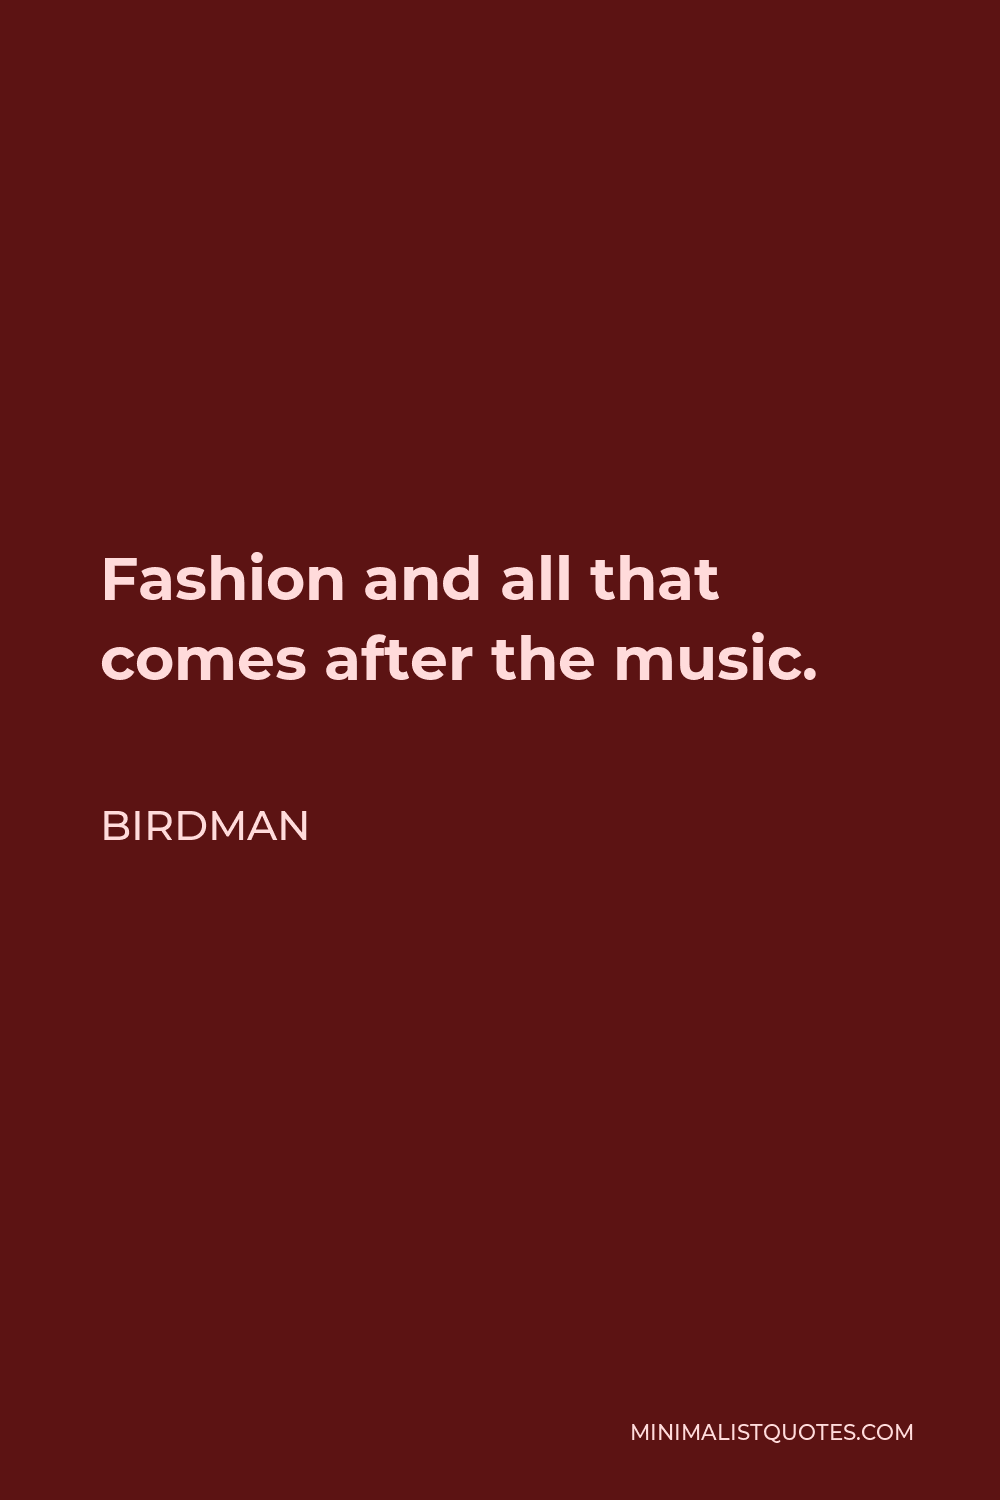 Birdman Quote - Fashion and all that comes after the music.